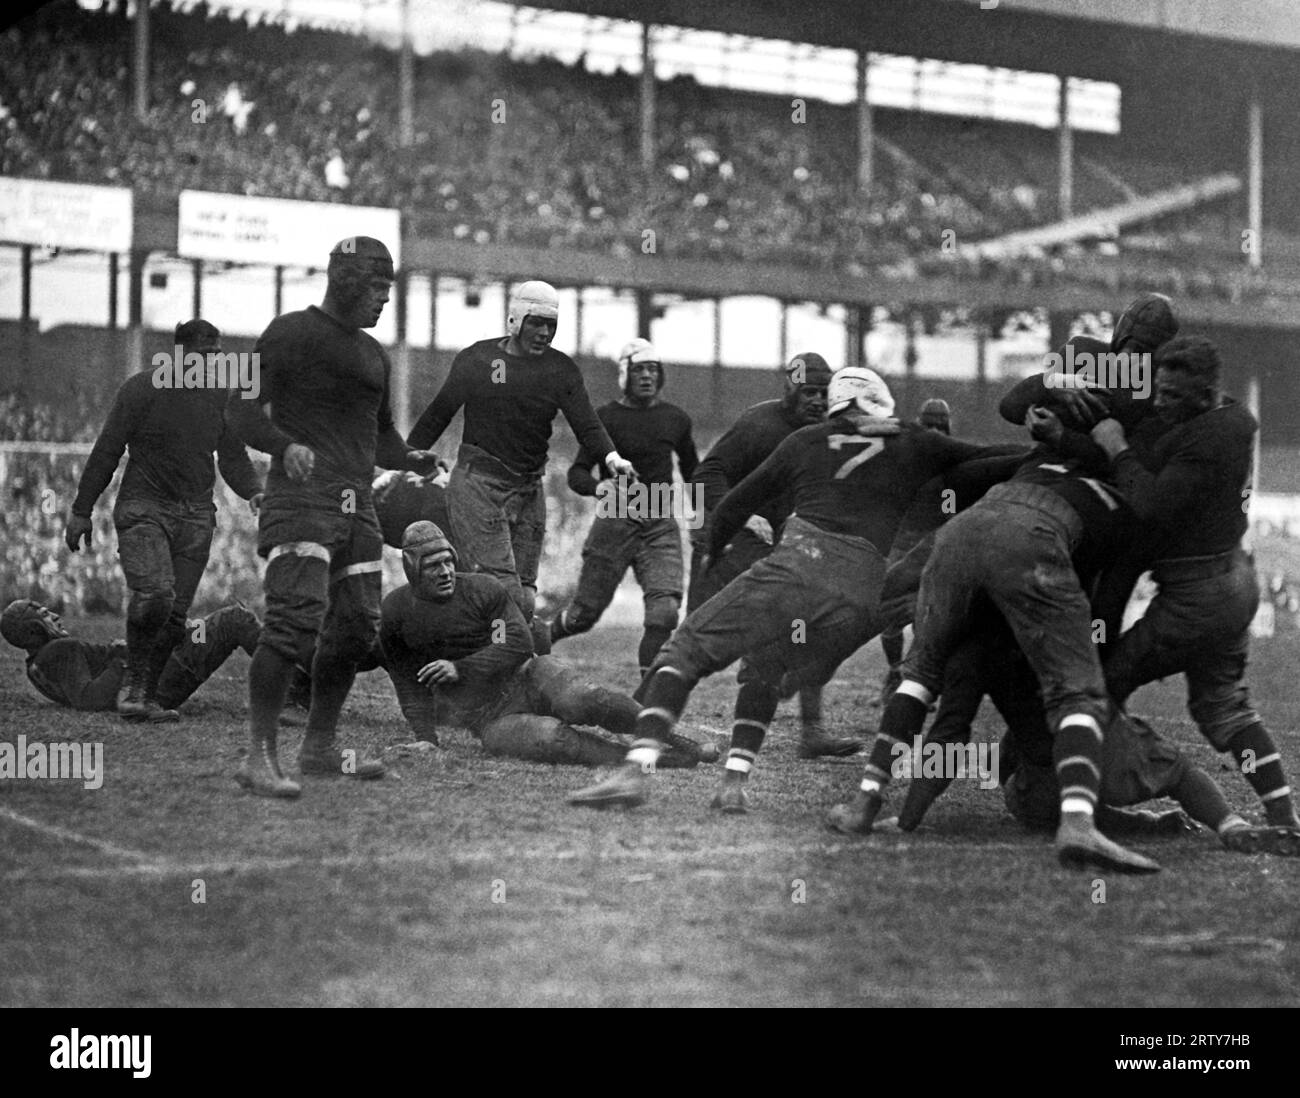 New York, New York  November 11, 1925  The Giants, New York's professional  football team, beat the  Kansas City Cowboys by a score of  9-3 this afternoon at the Polo Grounds.  Cowboys fullback C. Hill, formerly of Baylor University, shown being tackled. Stock Photo